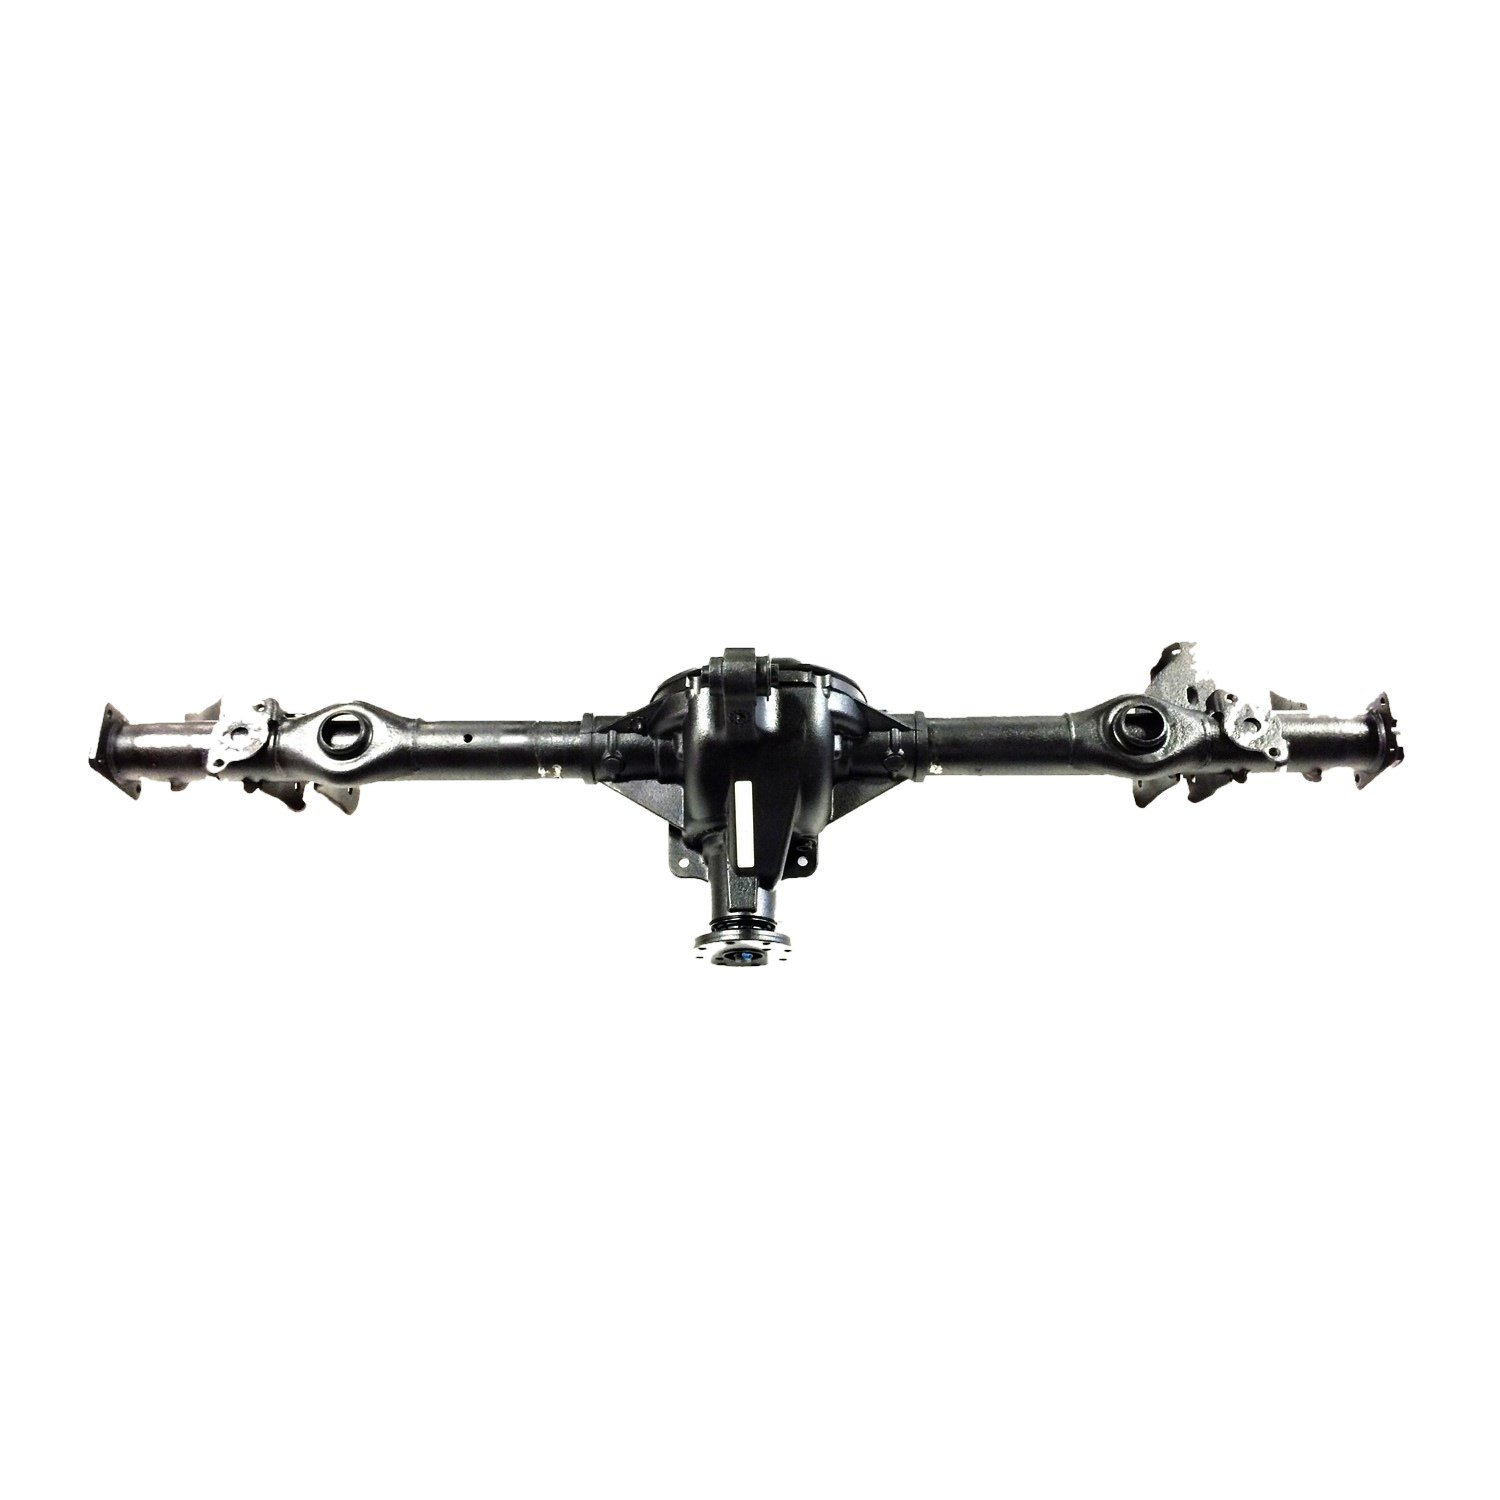 Remanufactured Complete Axle Assembly for 7.5" 99-02 Mustang 3.23 w/o ABS, Posi LSD